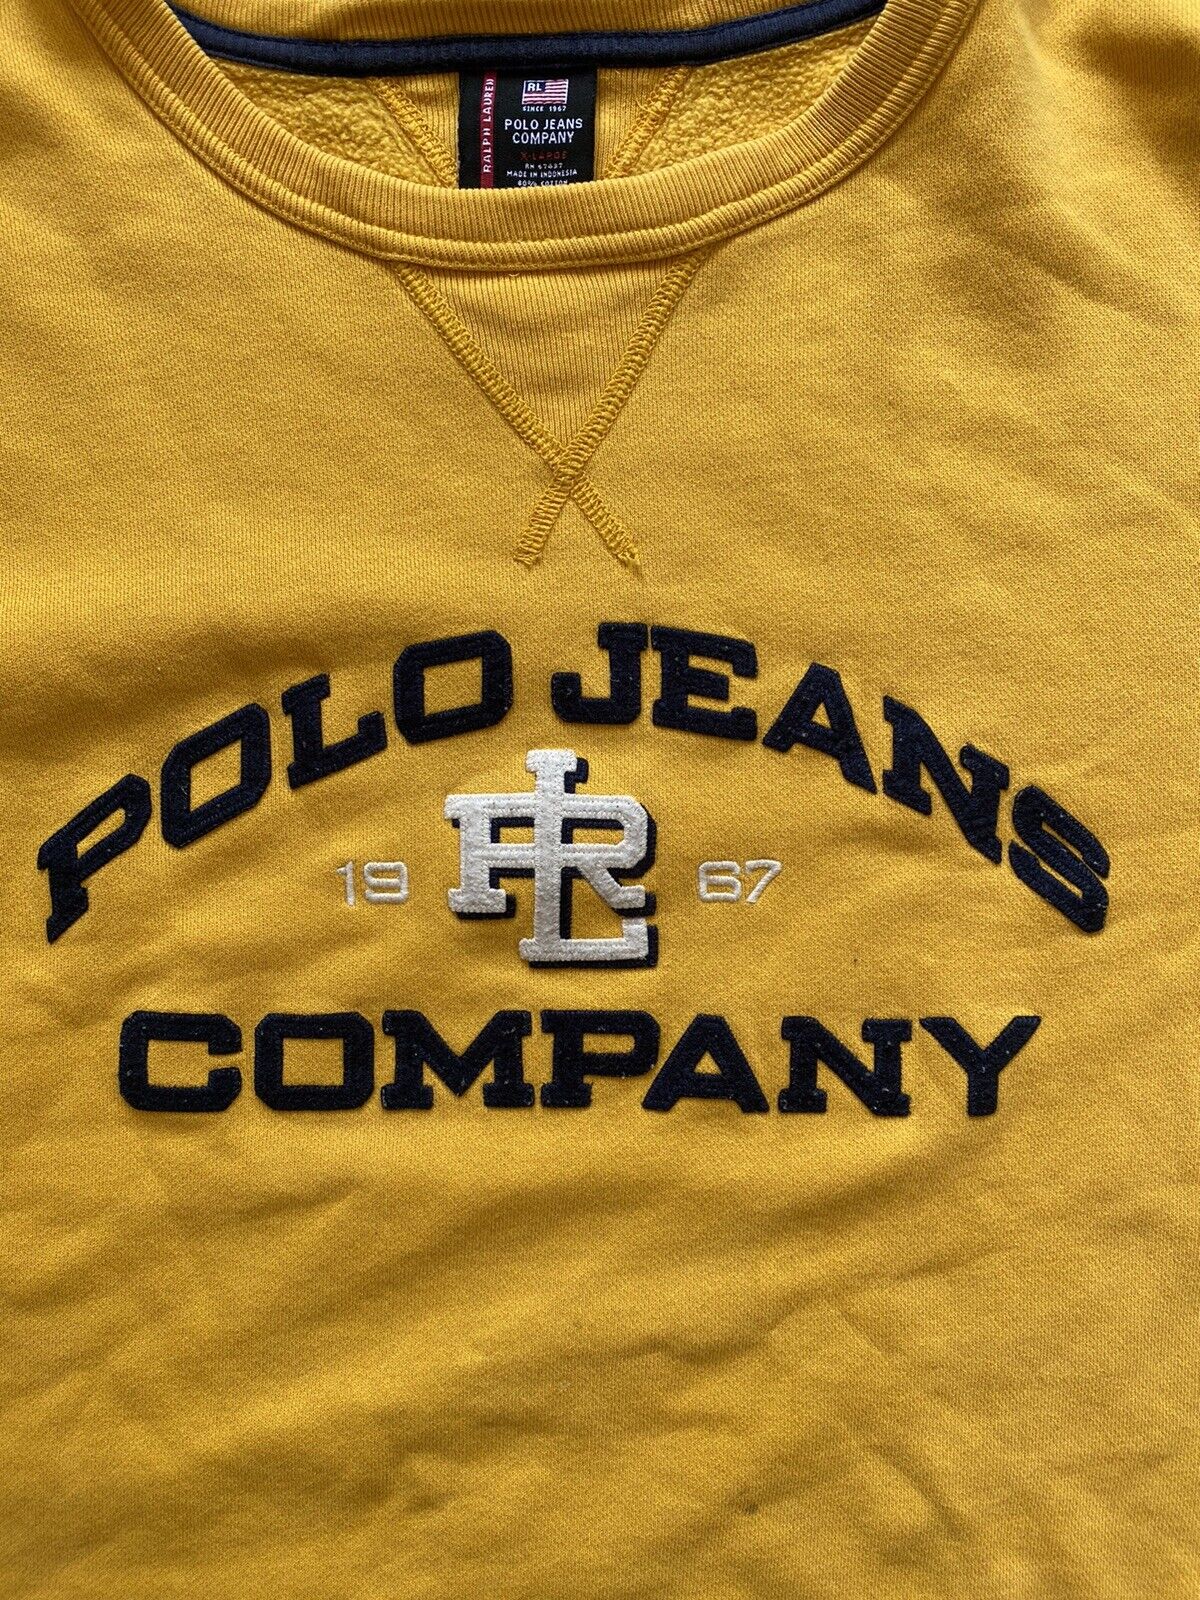 Polo Ralph Lauren Jeans Co RL-67 Embroidered Signature Yellow Sweatshirt  Mens XL